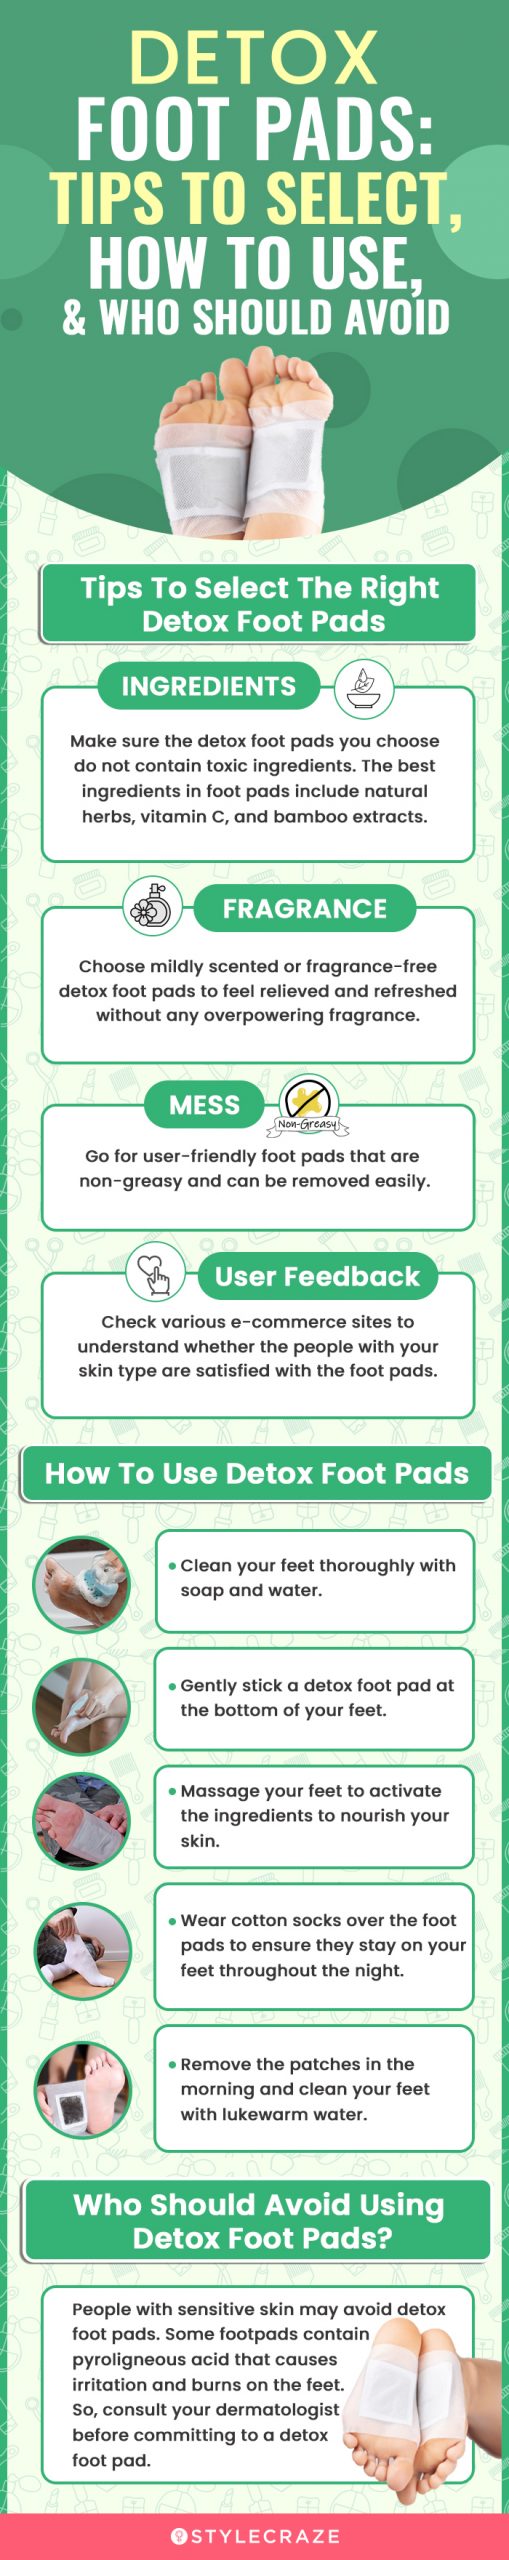 Detox Foot Pads: Tips To Select, How To Use & Who Should Avois [infographic]